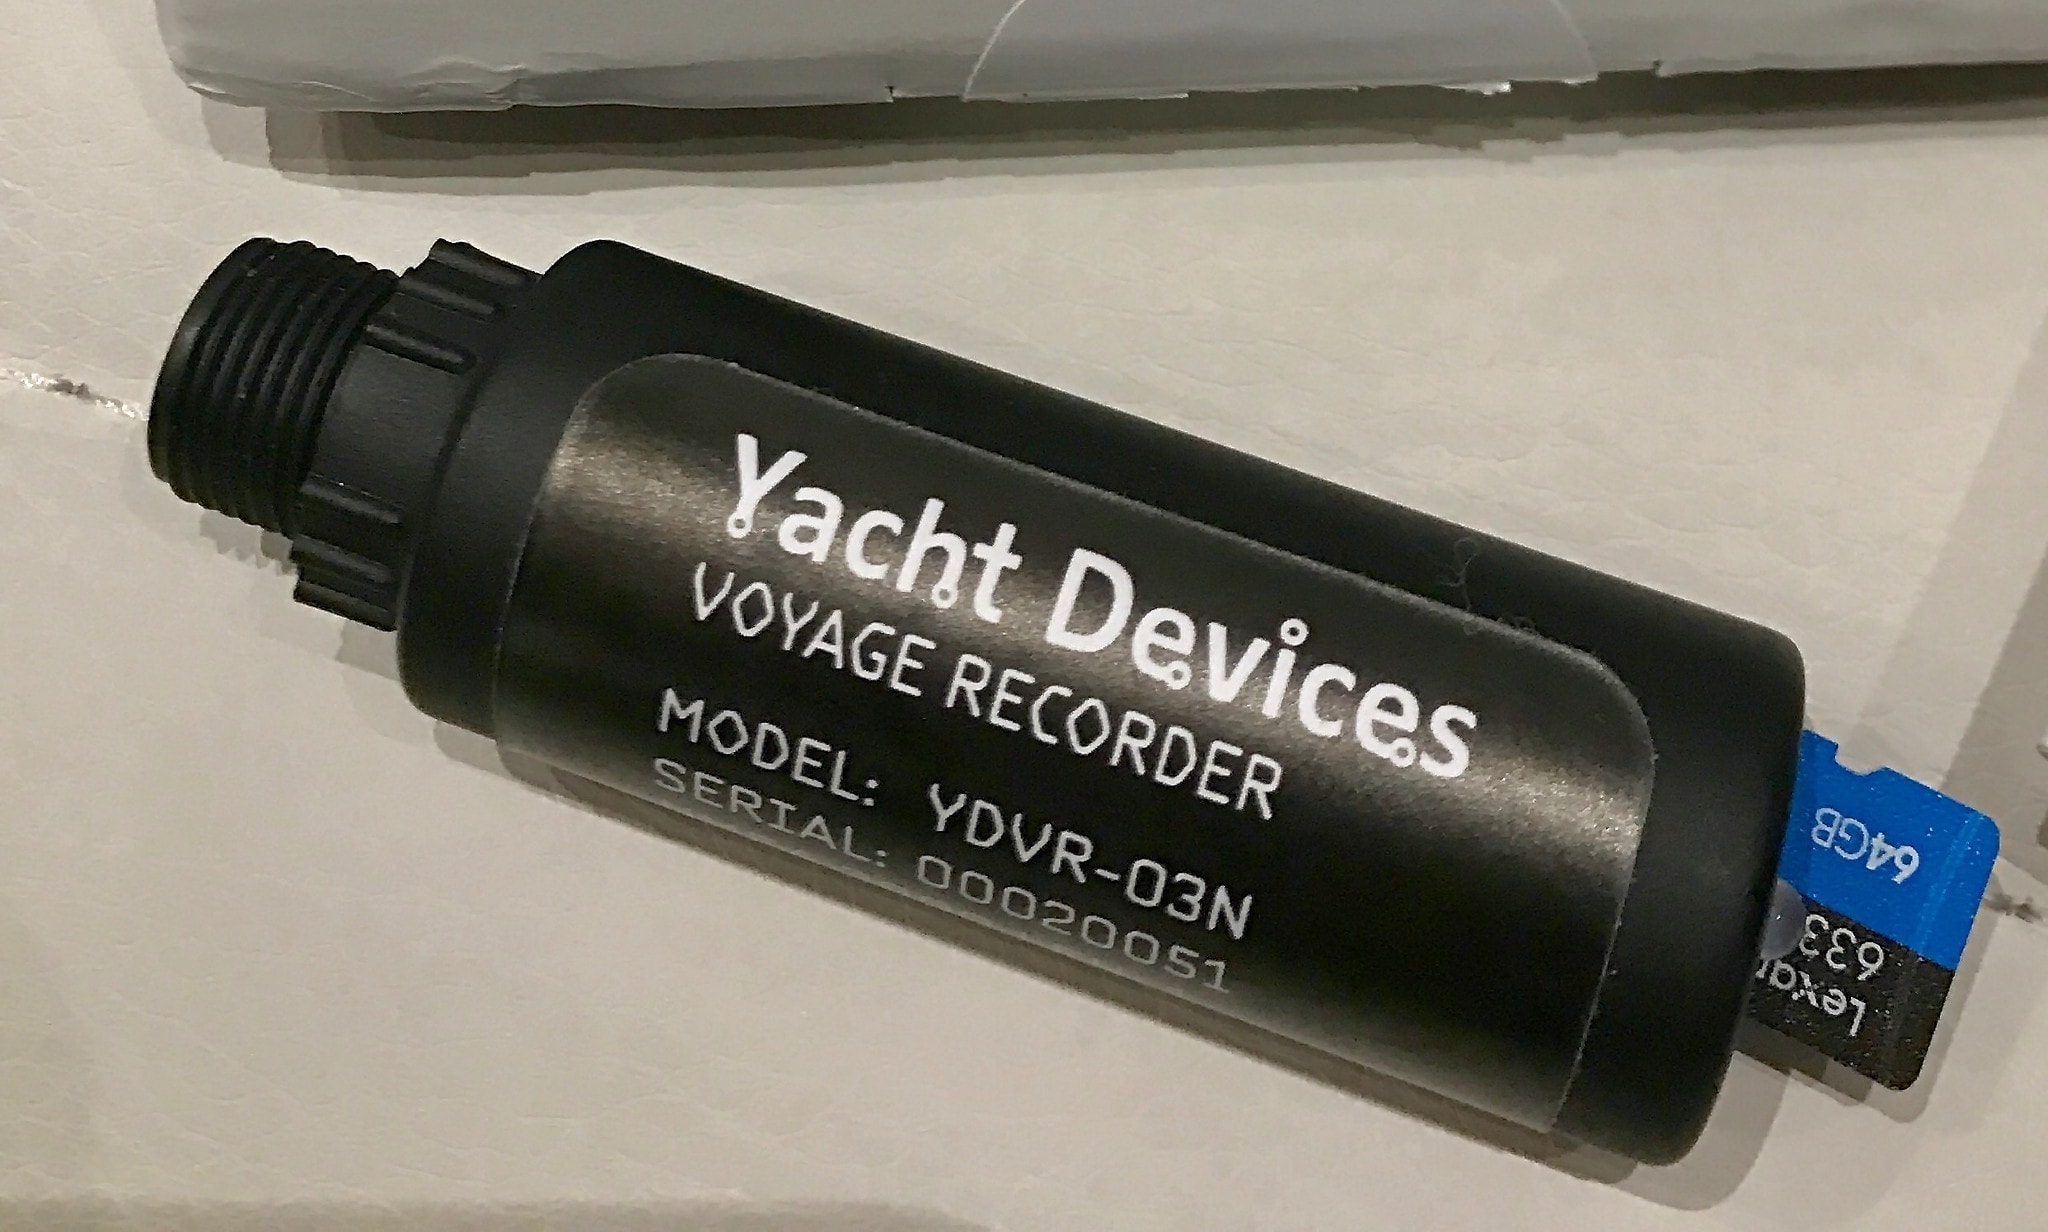 yacht devices voyage recorder